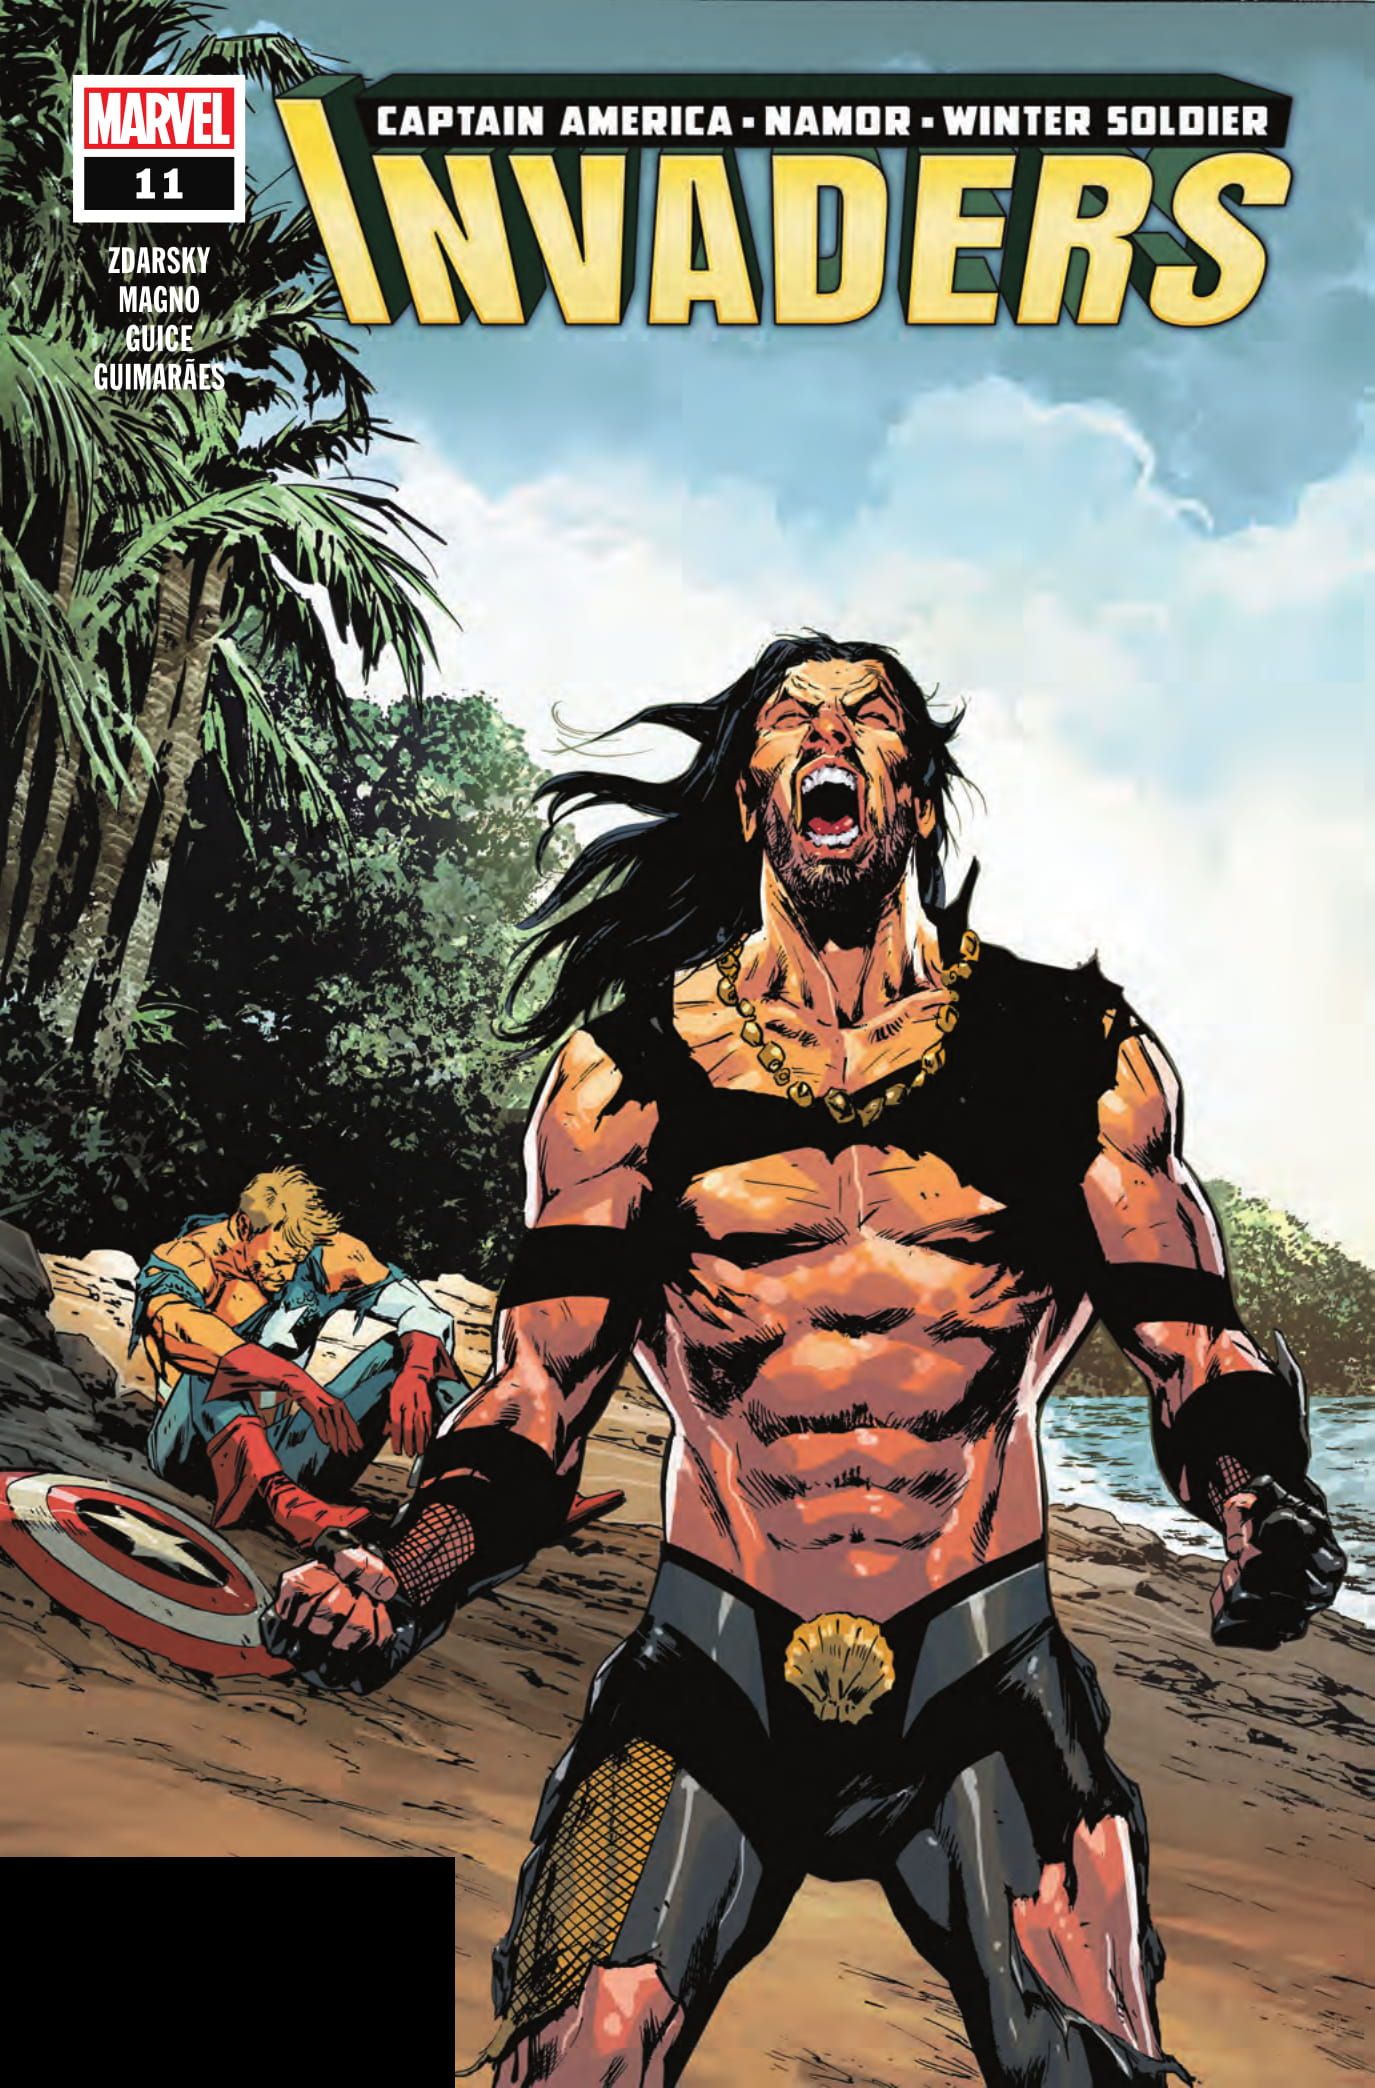 Captain America Shows Namor How To Be a Better King